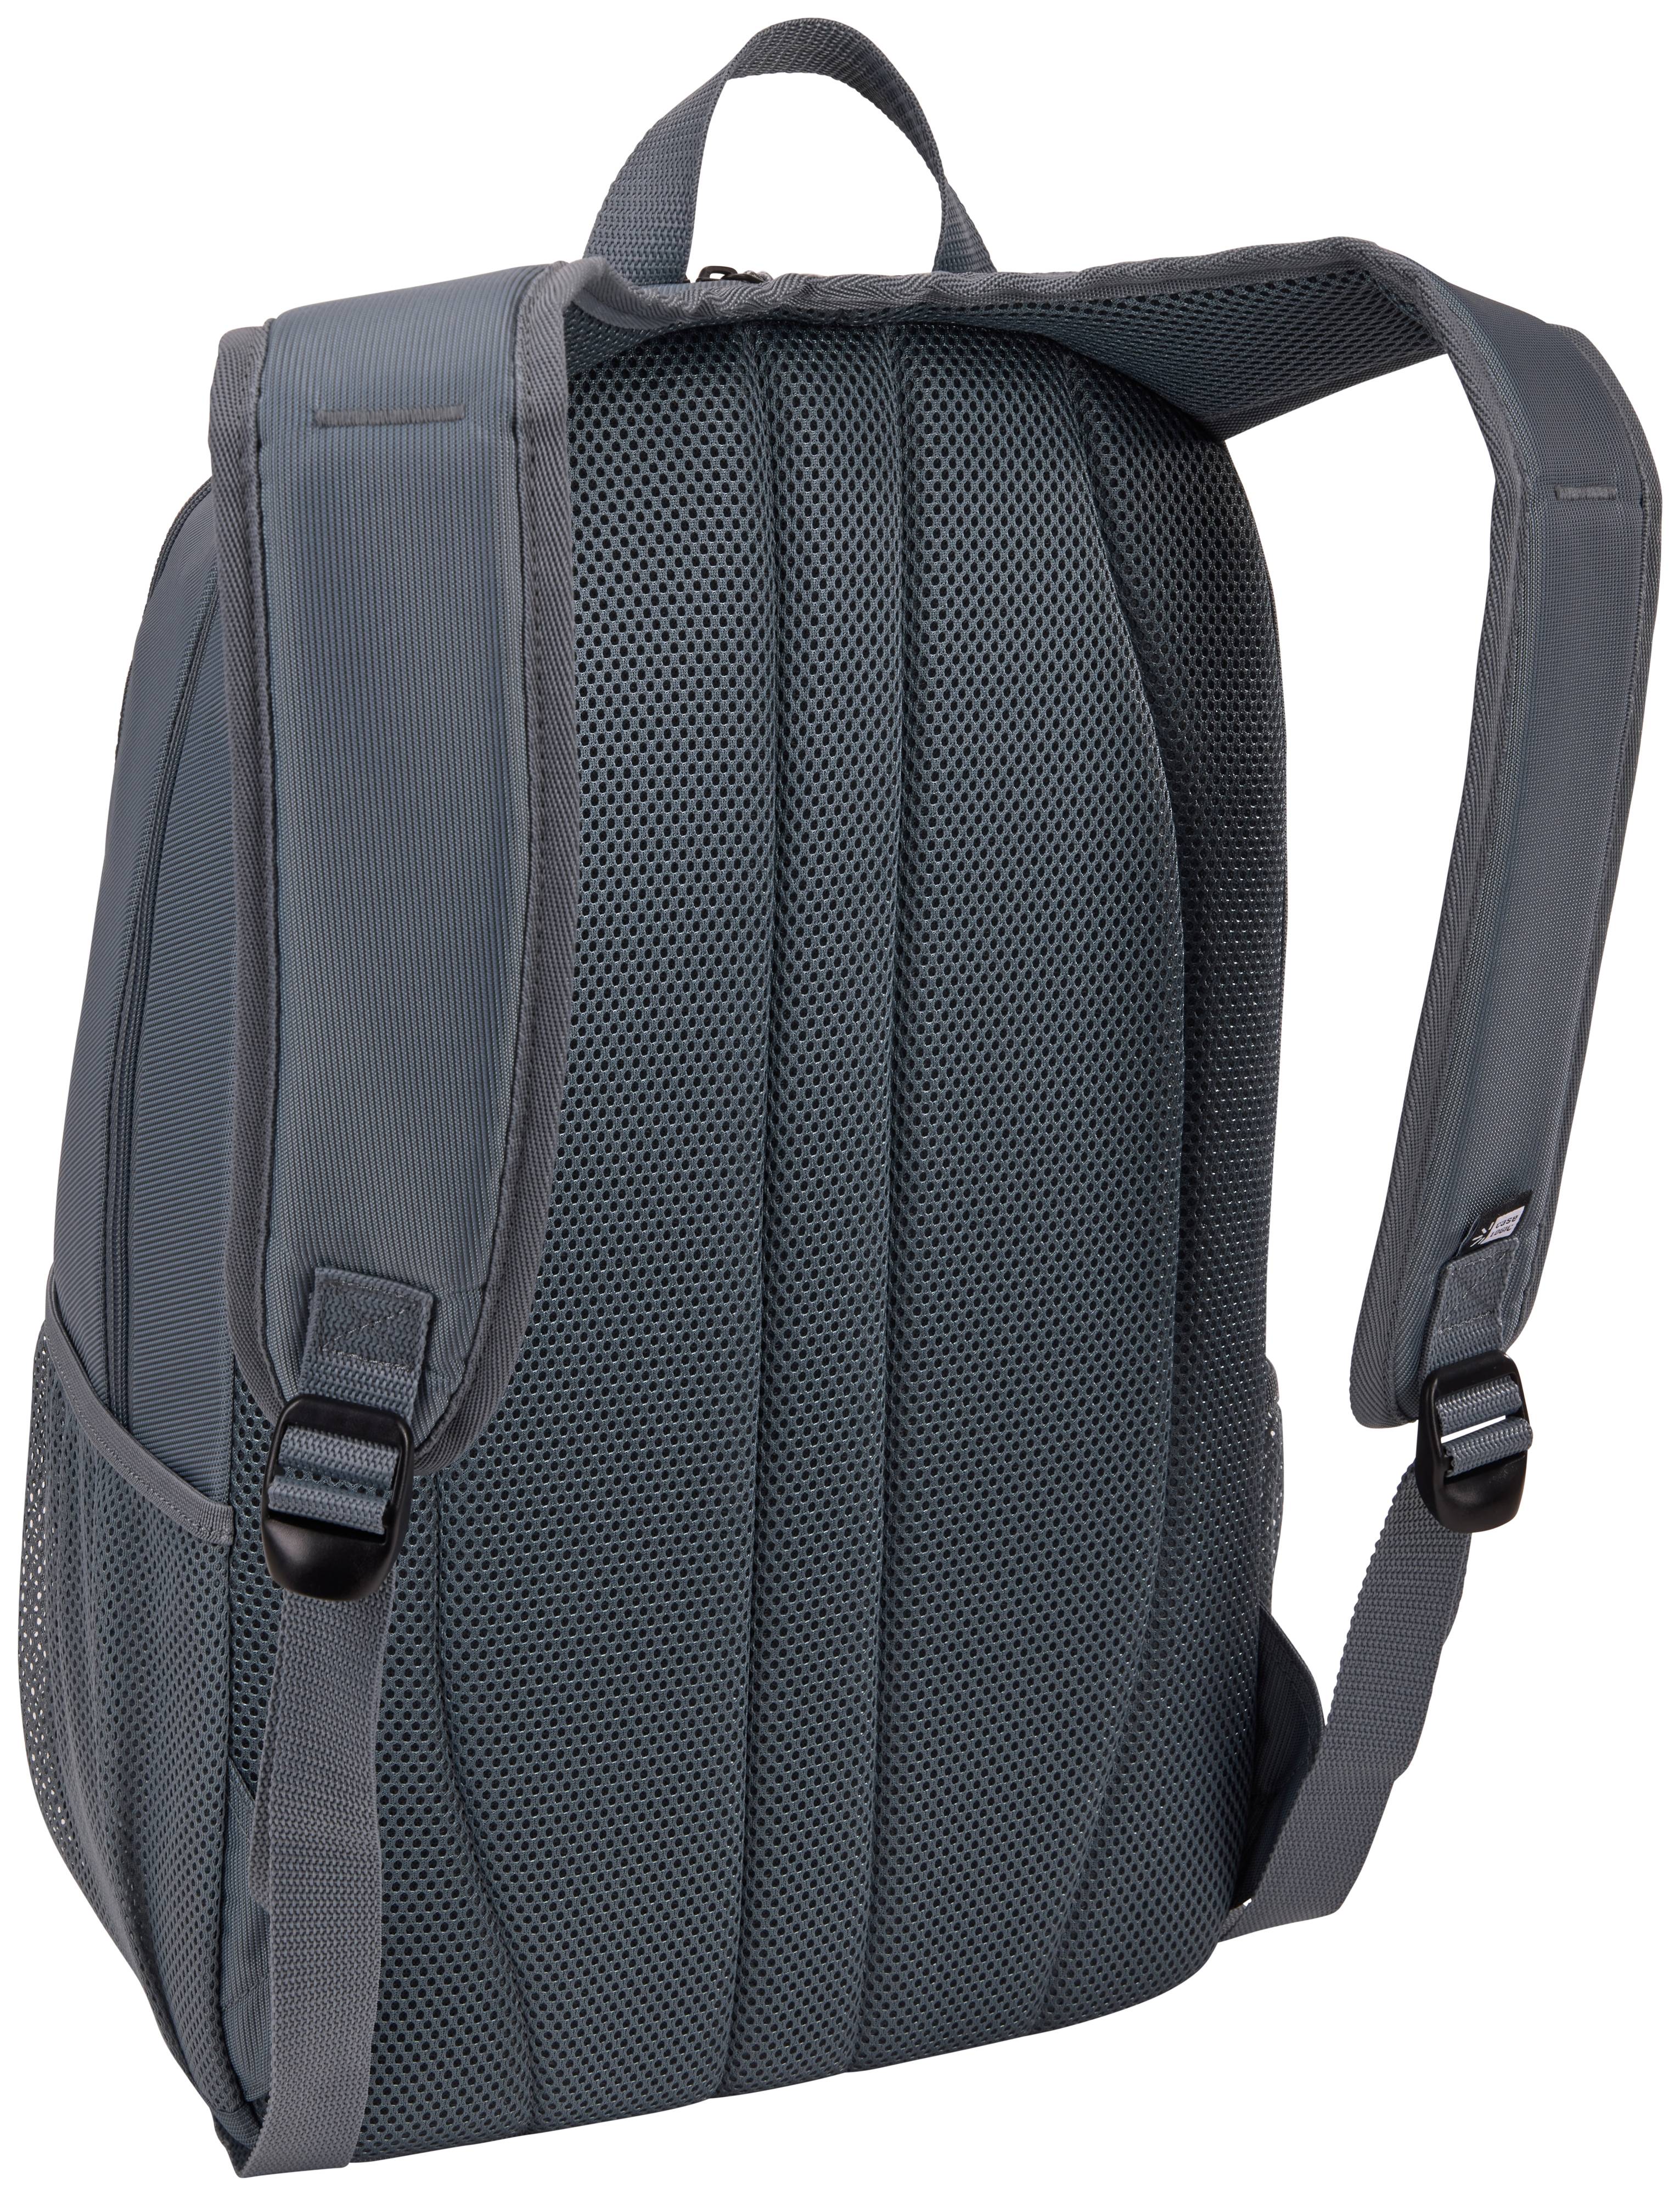 Rca Informatique - image du produit : JAUNT RECYCLED BACKPACK 15.6IN STORMY WEATHER